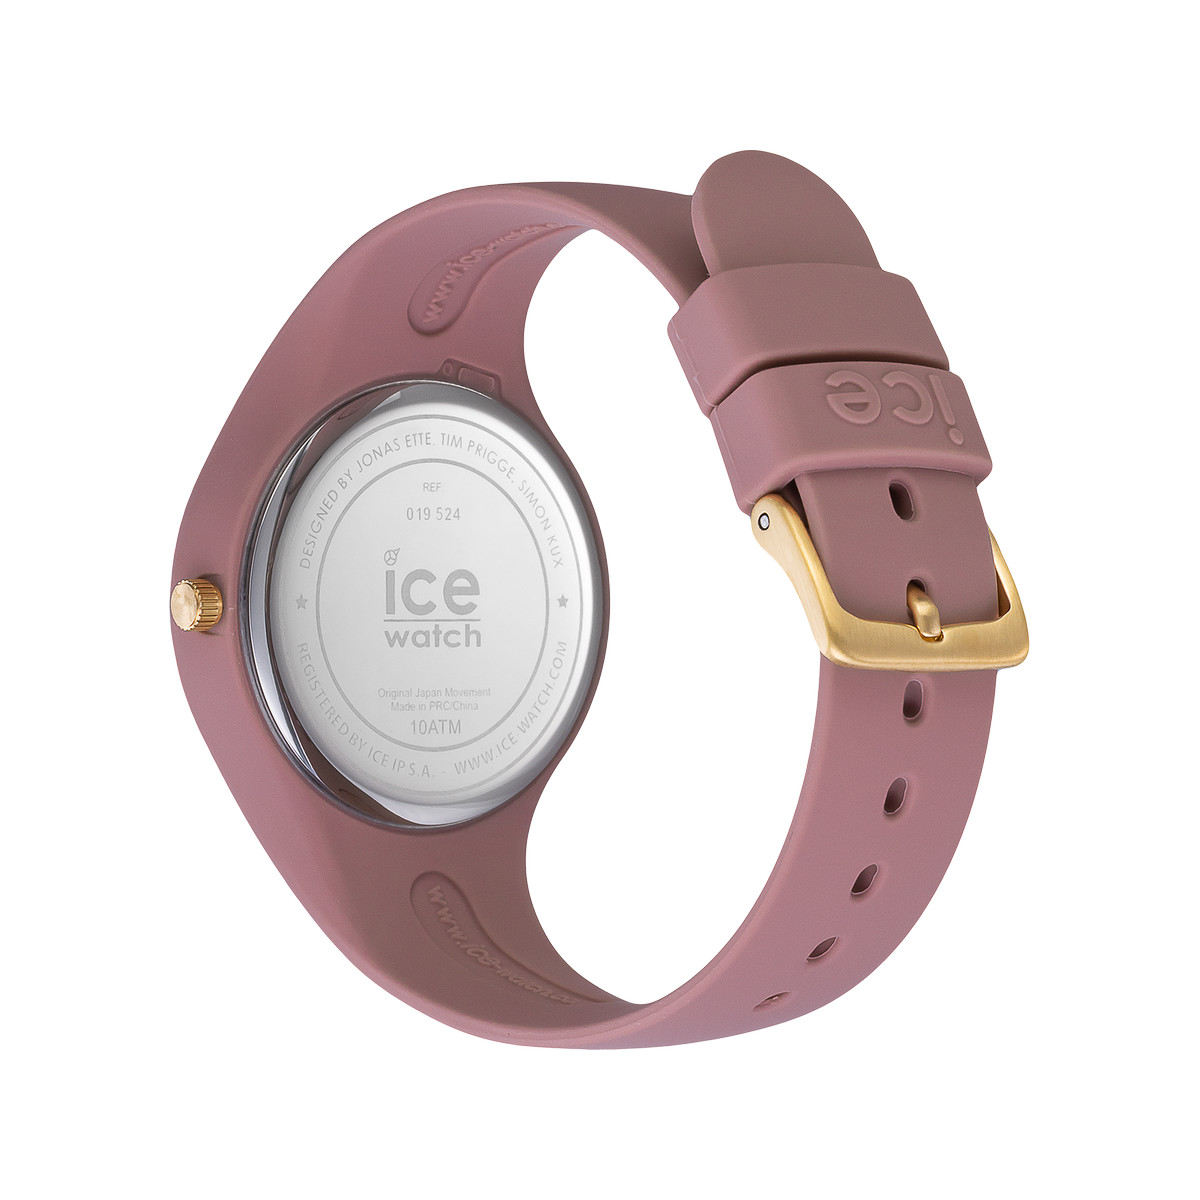 Montre Ice Watch Femme silicone rose - vue 3